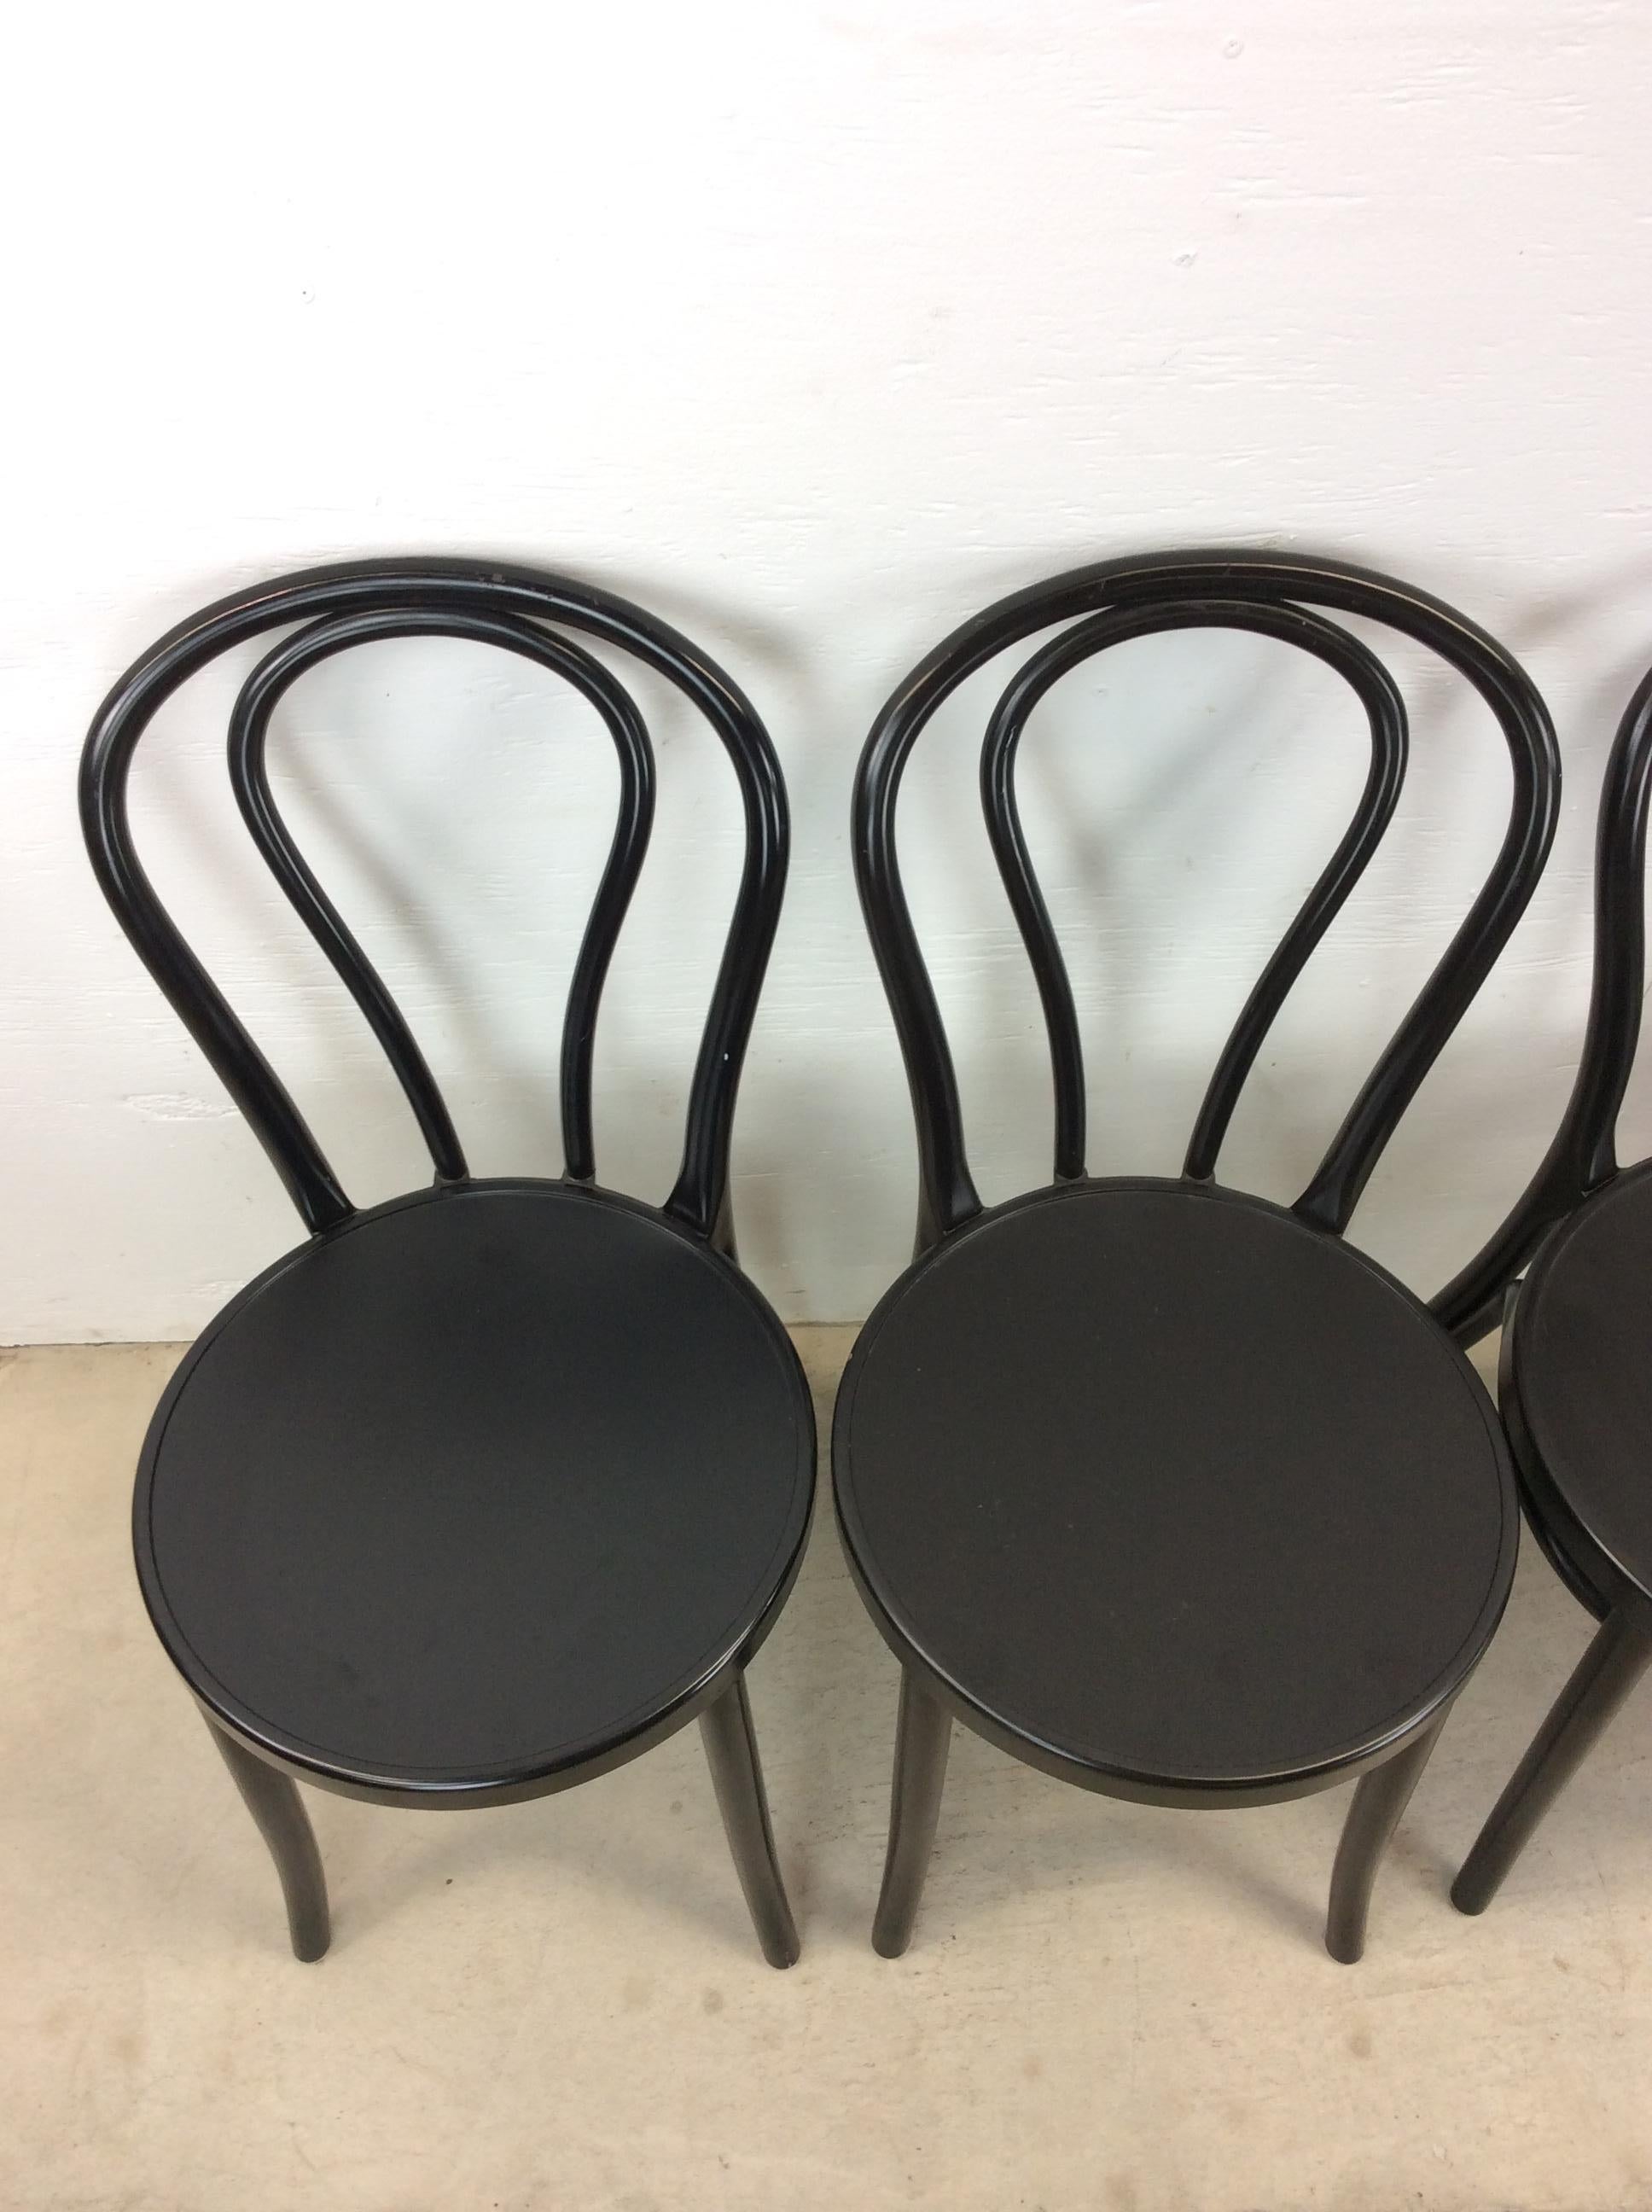 Unknown Set of 4 Vintage IKEA Black Cafe Style Chairs